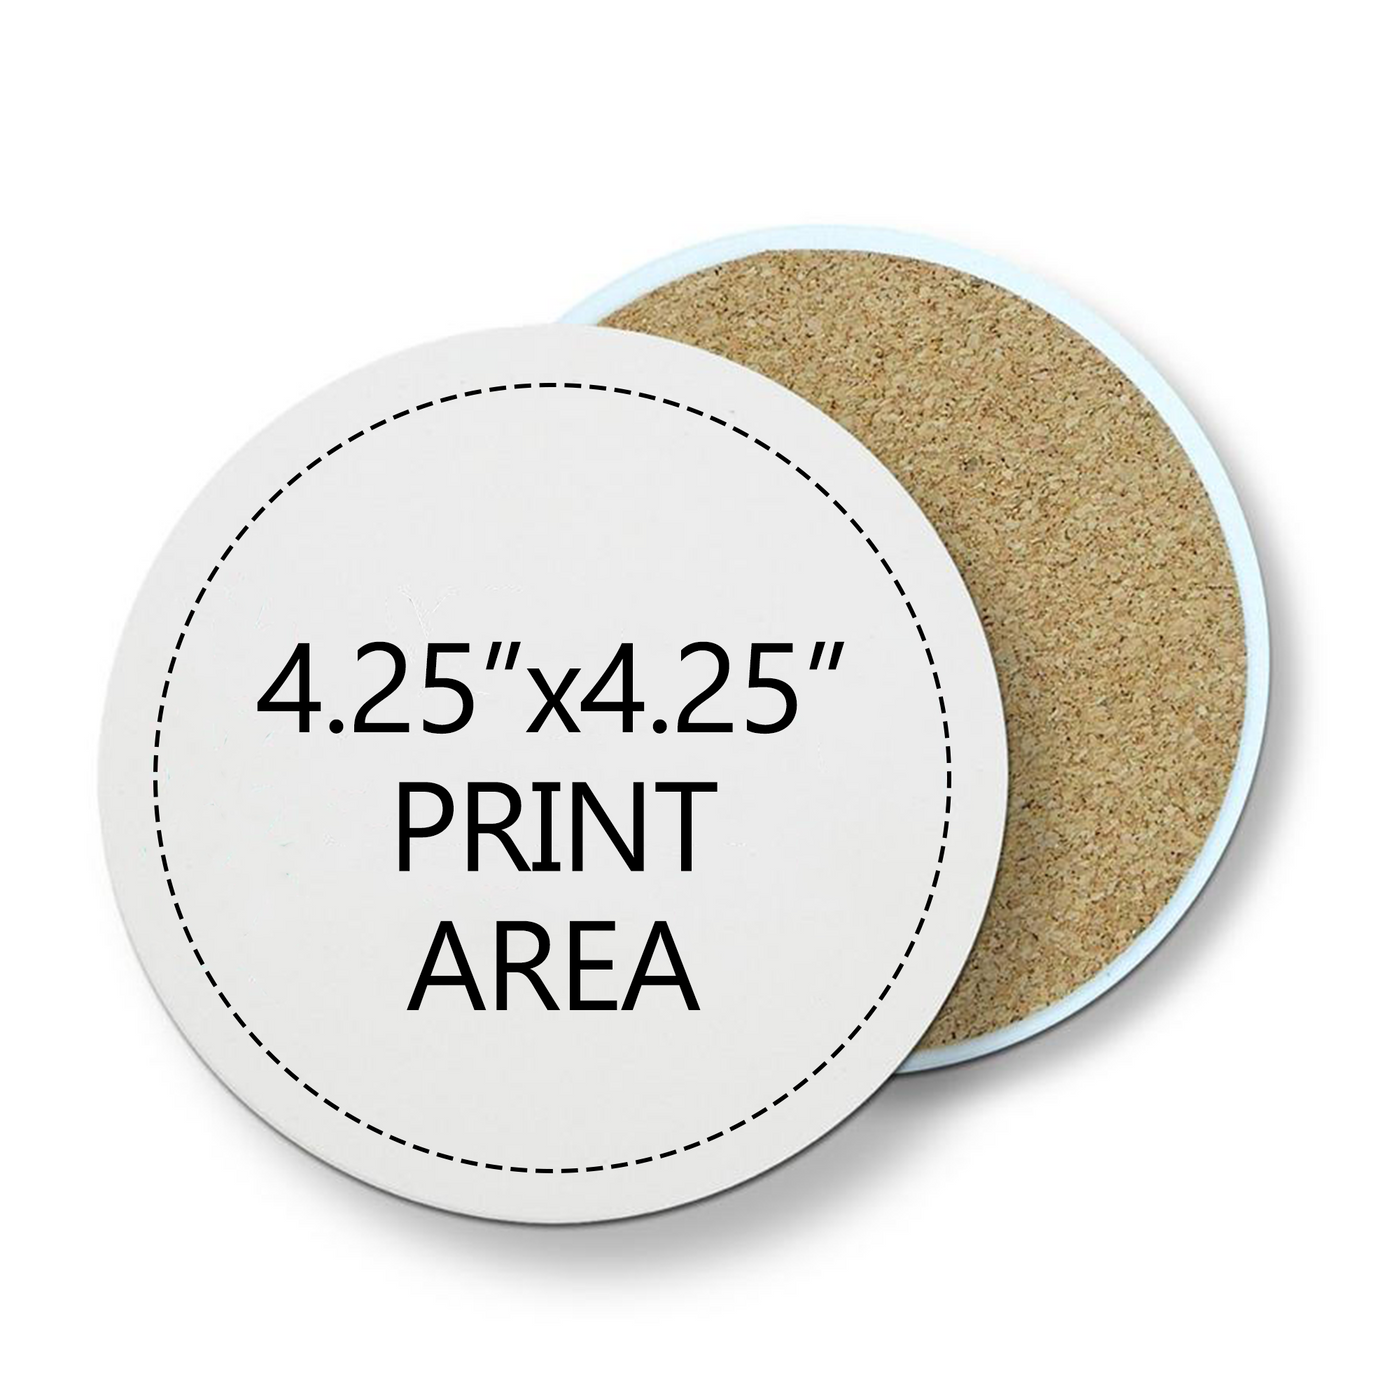 Round Absorbent Ceramic Stone Coaster with Centered Design